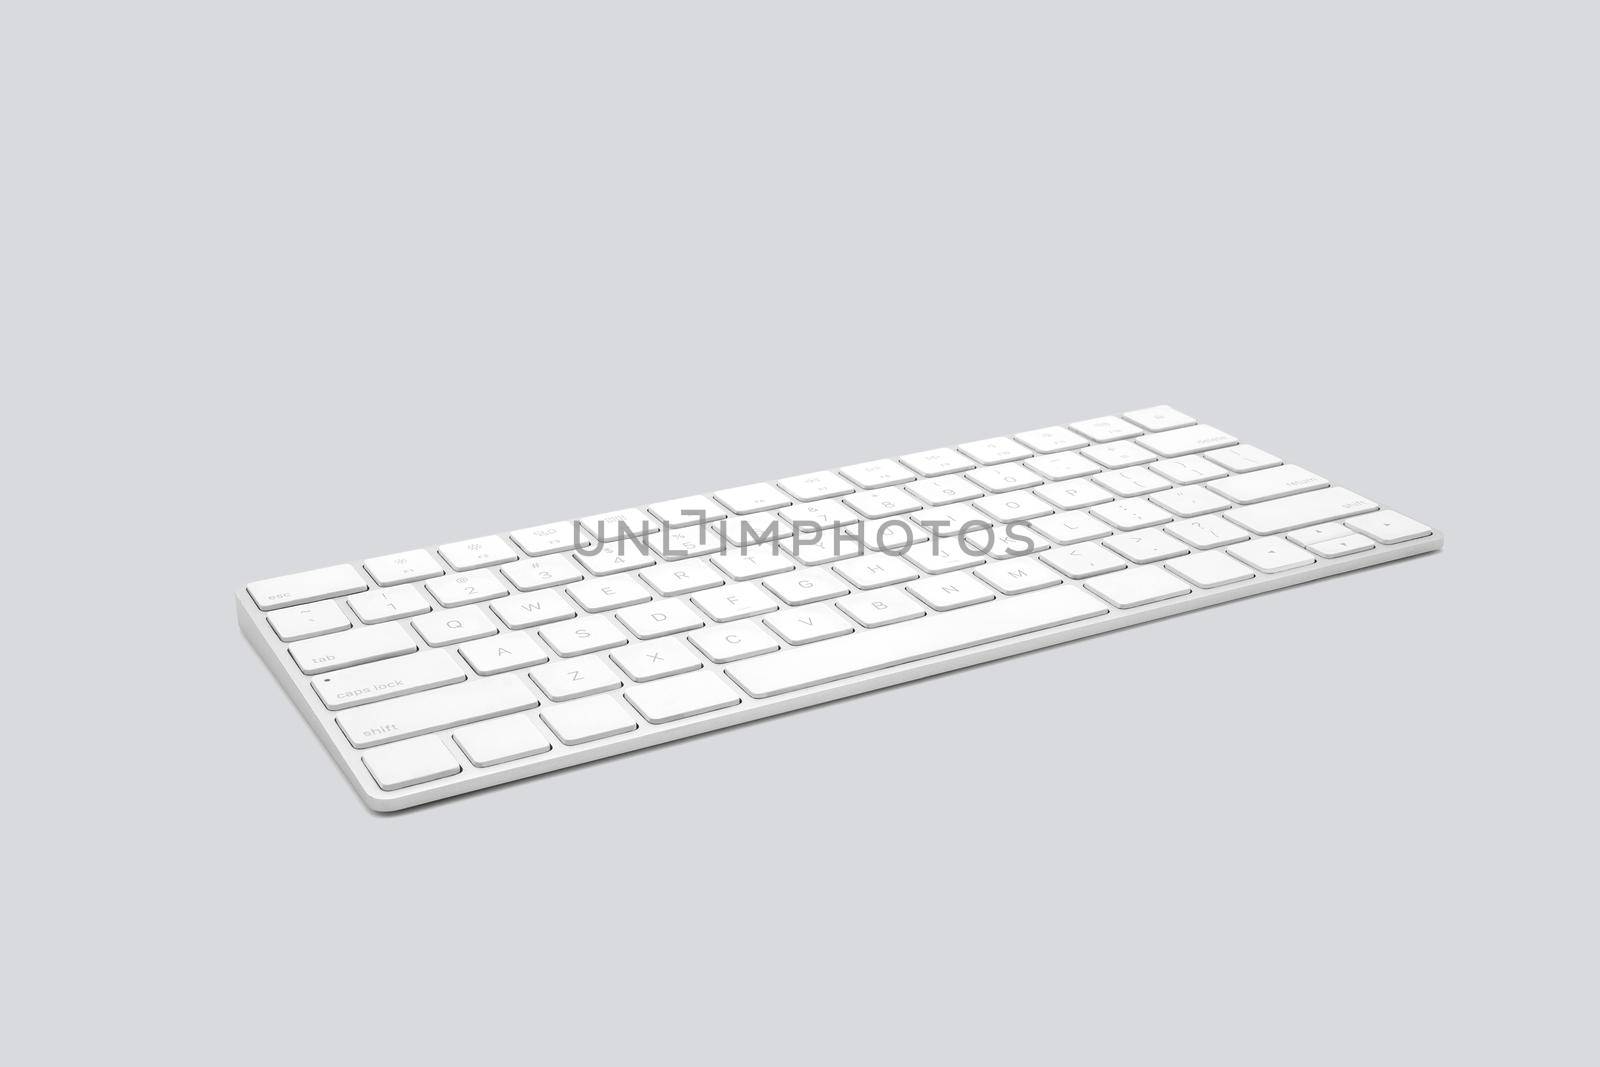 Keyboard computer isolated on white background, accessory and equipment electronic, technology digital.